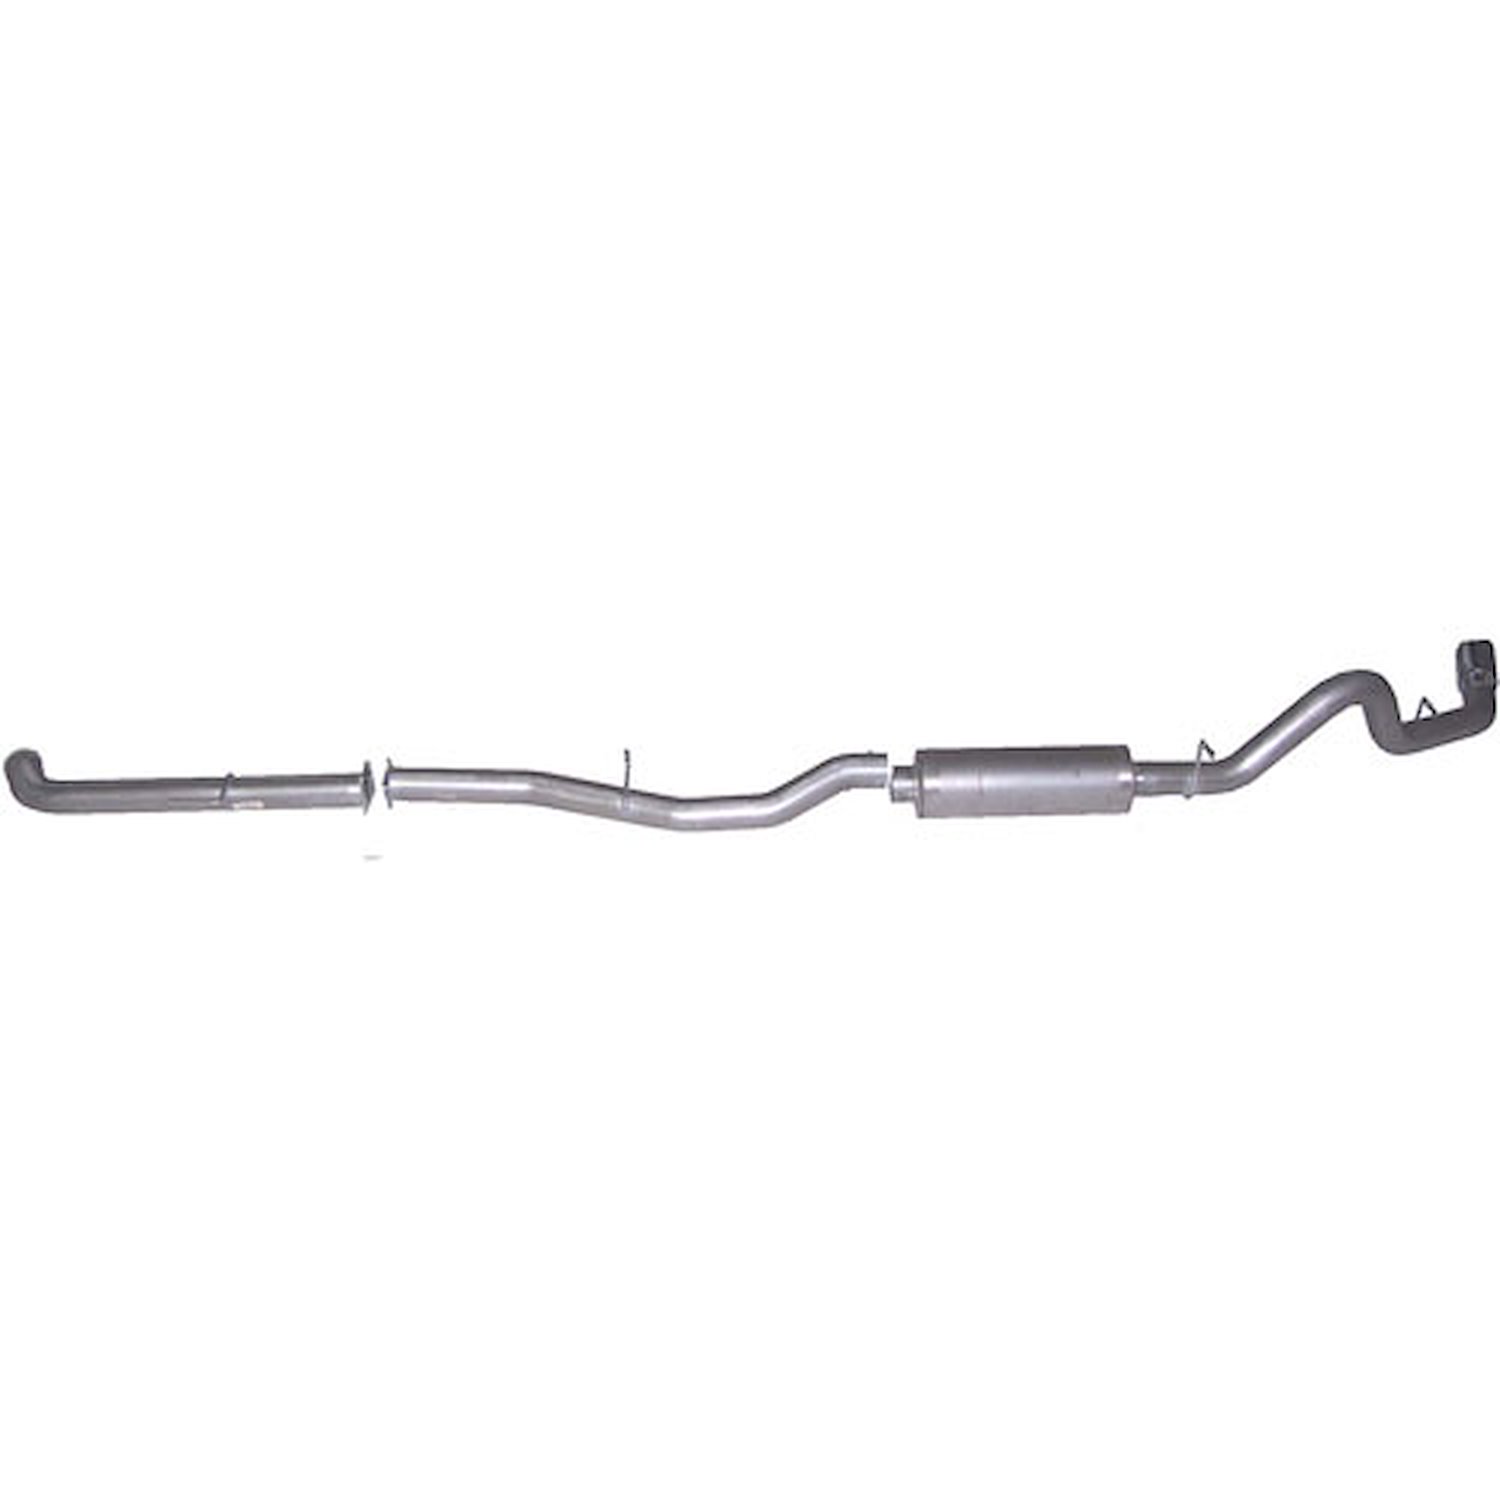 Swept-Side Cat-Back Exhaust 1994-95 Chevy Suburban 5.7L